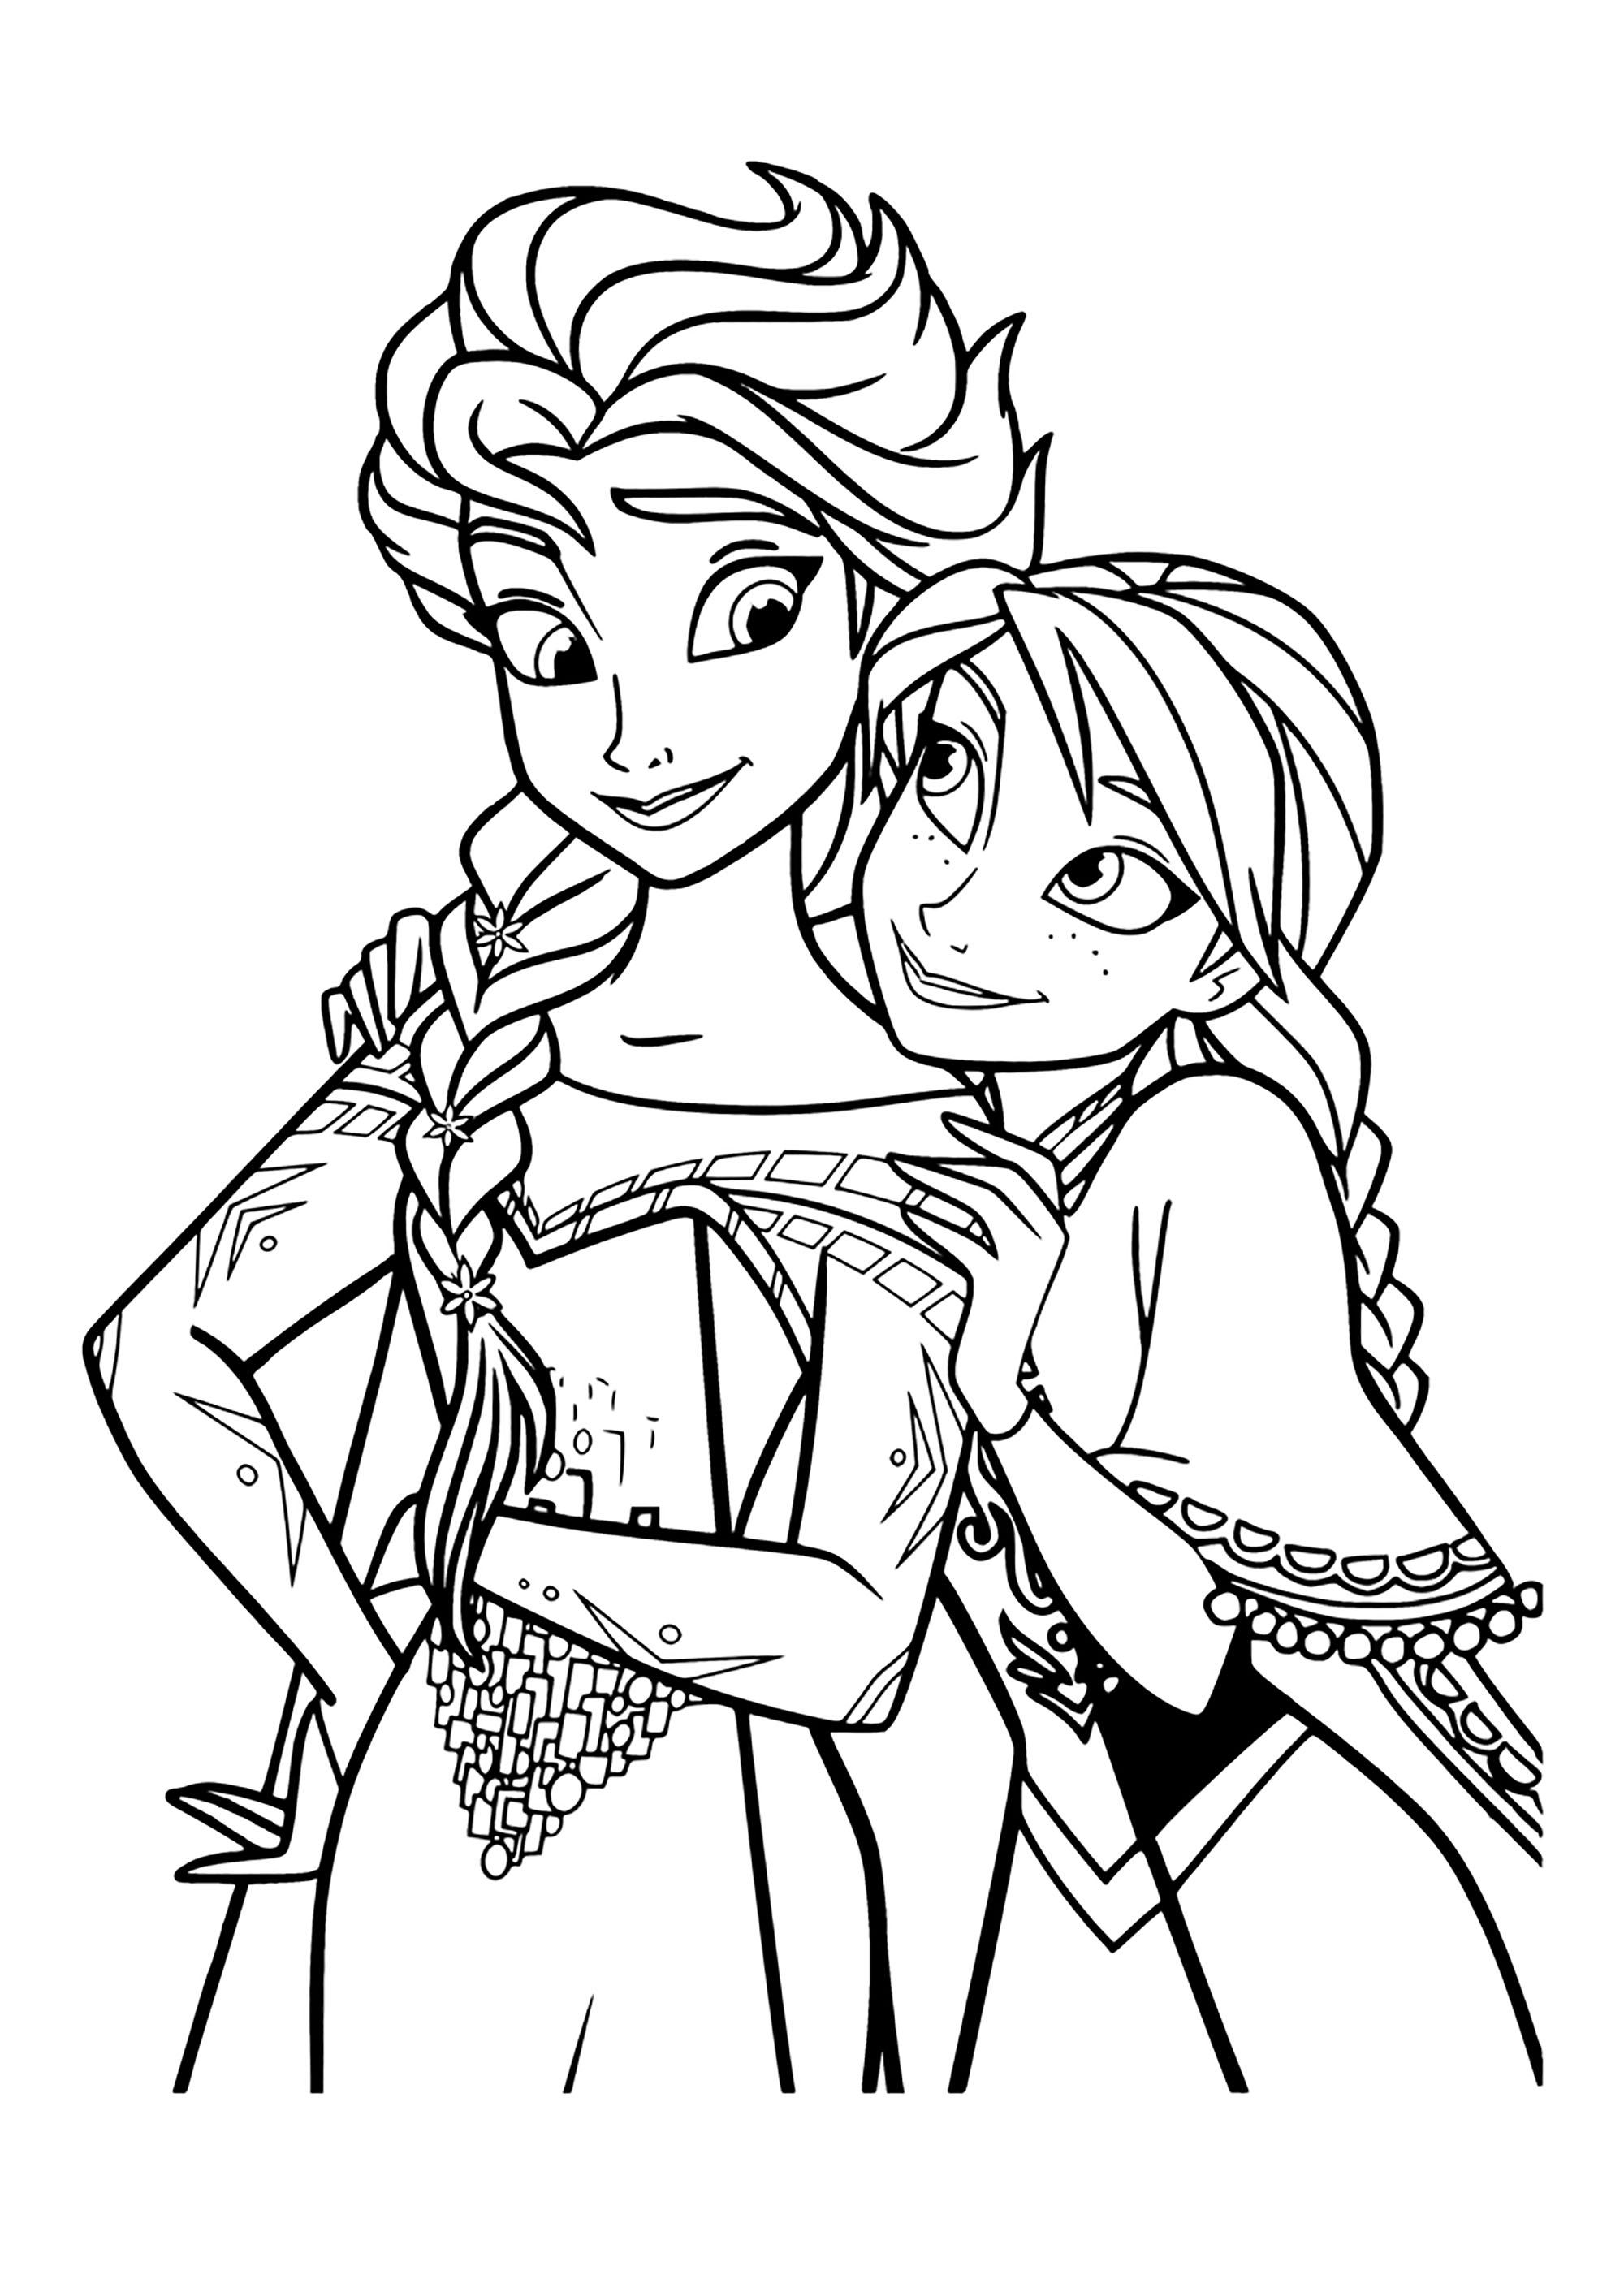 Free Printable Frozen Friends Coloring Page, Sheet and Picture for Adults  and Kids, Girls and Boys - WriteOnCon.com